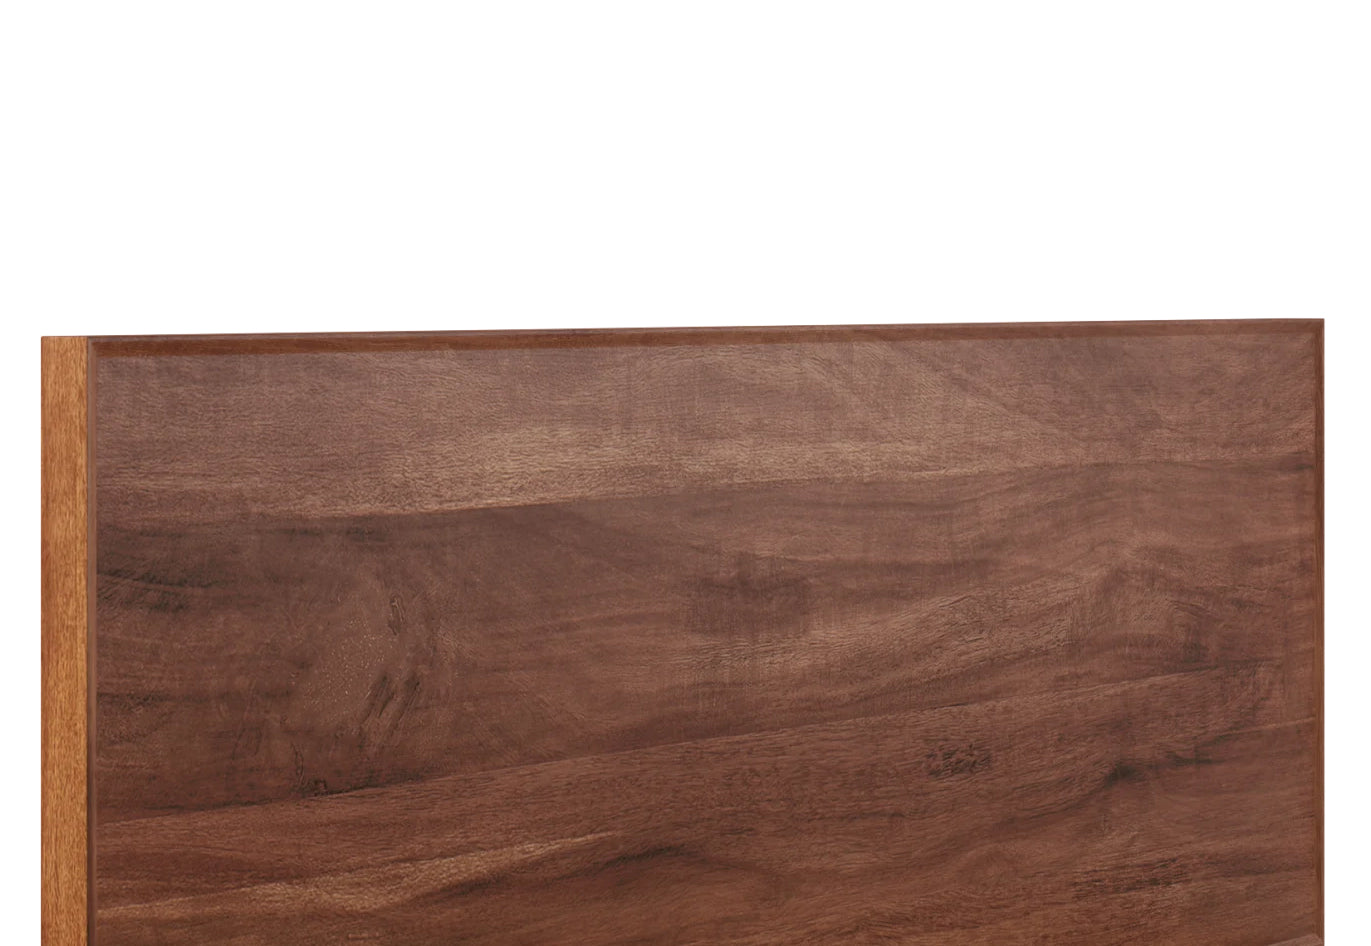 Close-up of acacia wood headboard for bed frame